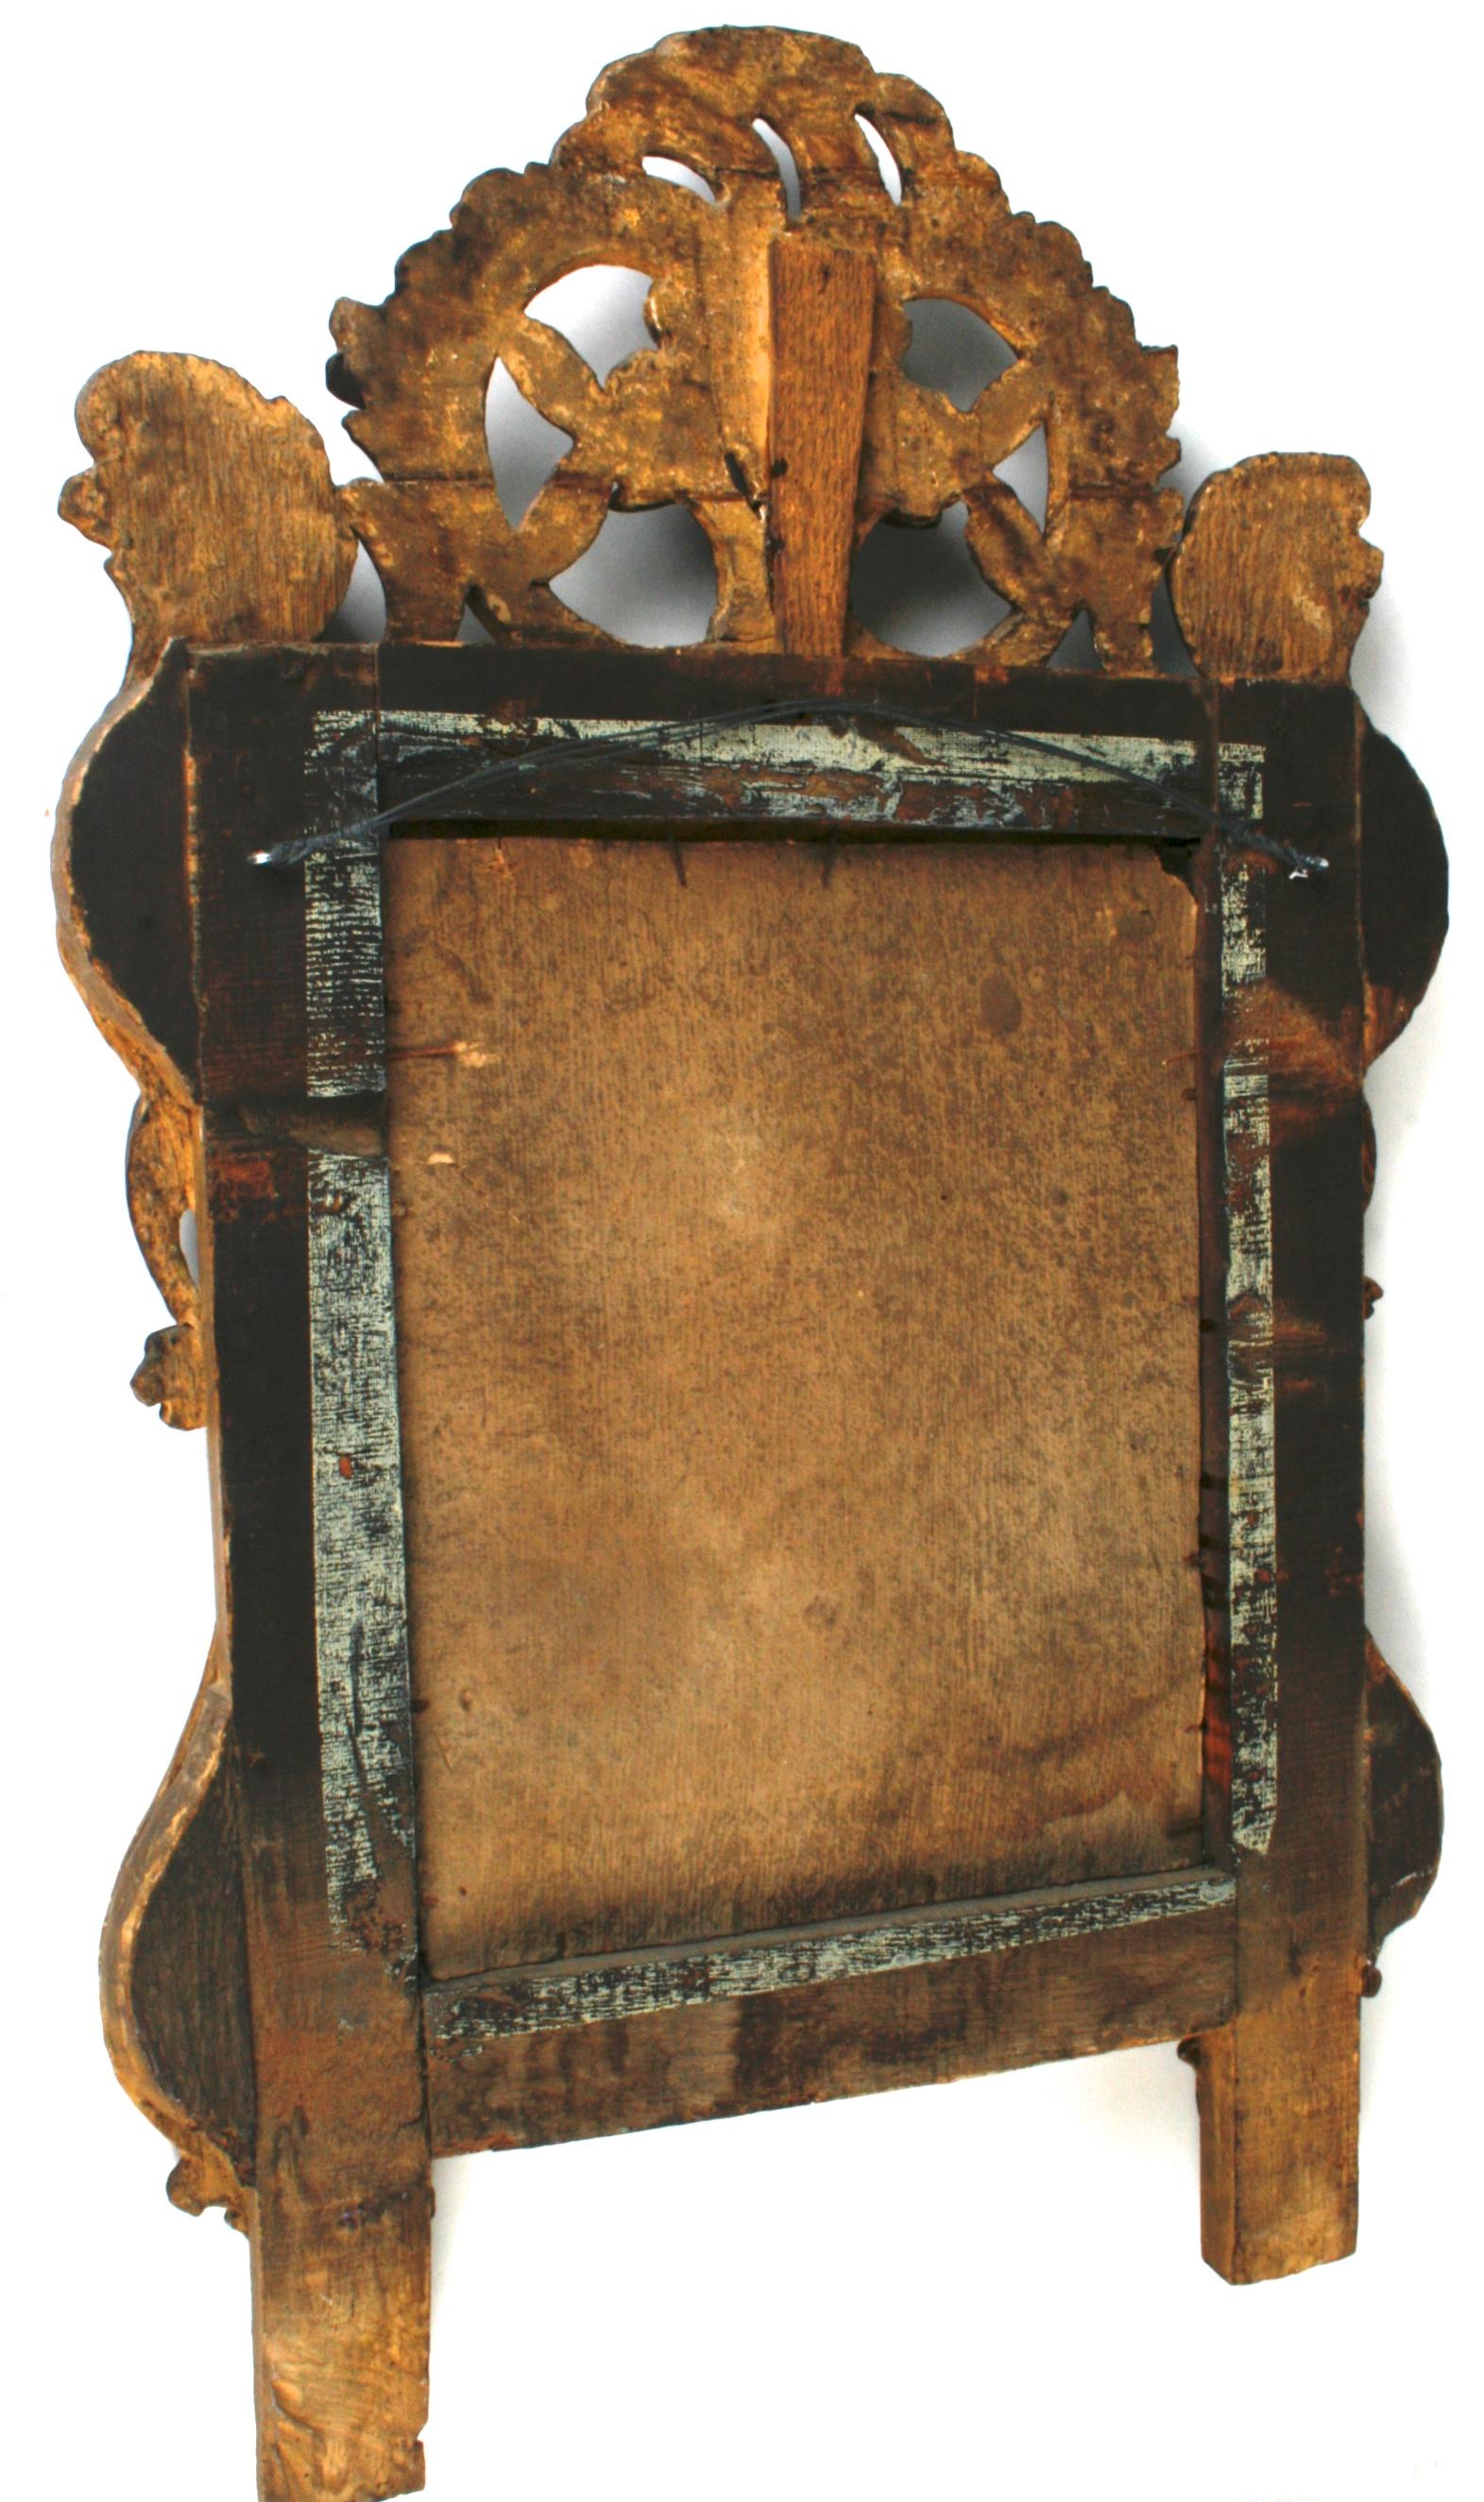 An Italian Baroque giltwood and painted mirror, c1750. This beautifully framed mirror has its original mirror plate and is crowned by a central cartouche of patinated flowers. Centred at the base: A carved and gilt shell introduces an intertwining